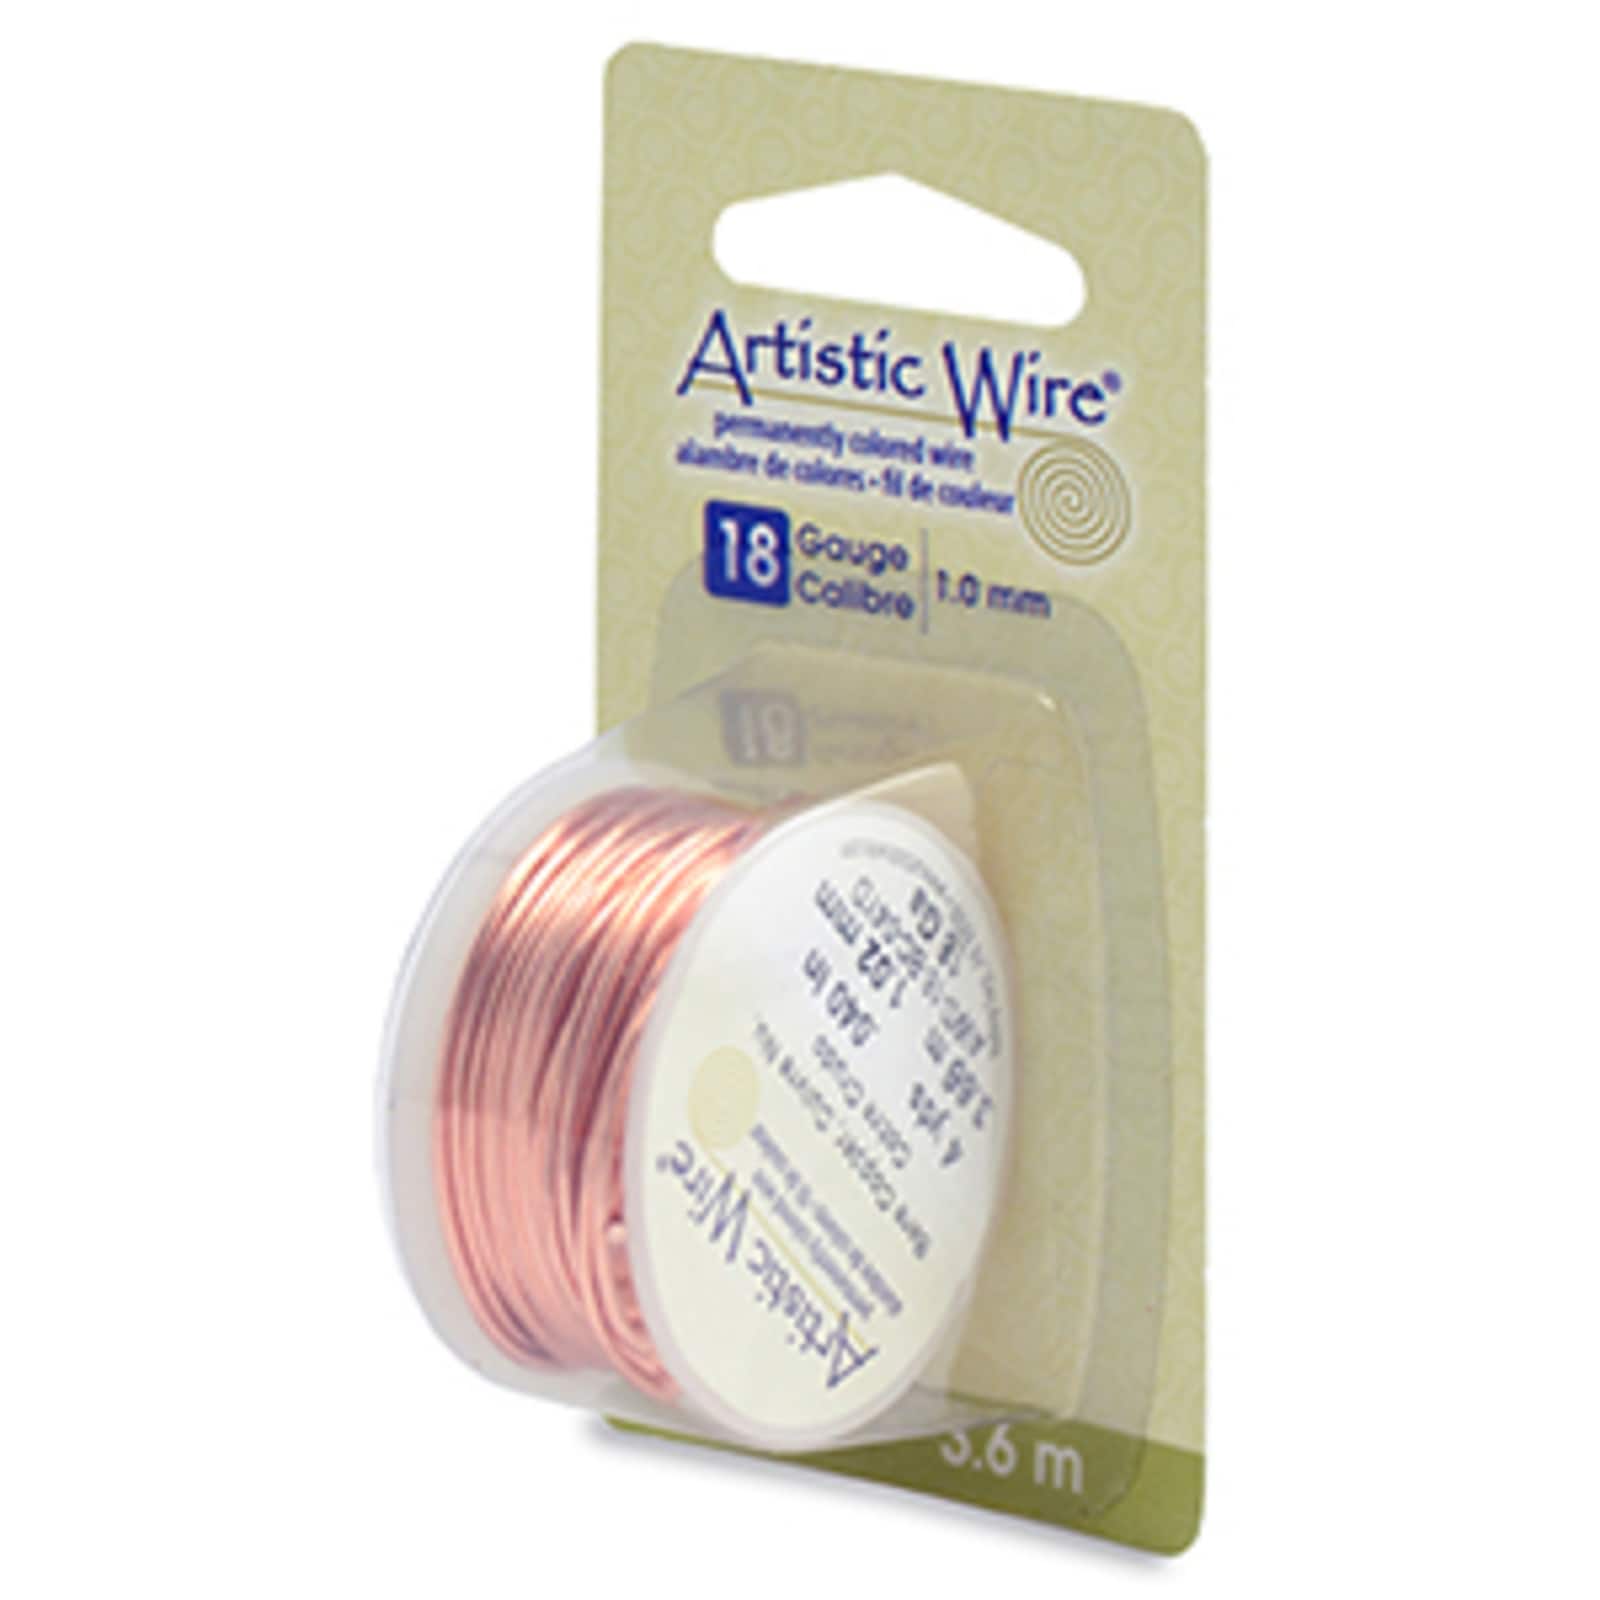 Artistic Wire&#xAE; 18 Gauge Colored Copper Craft Wire